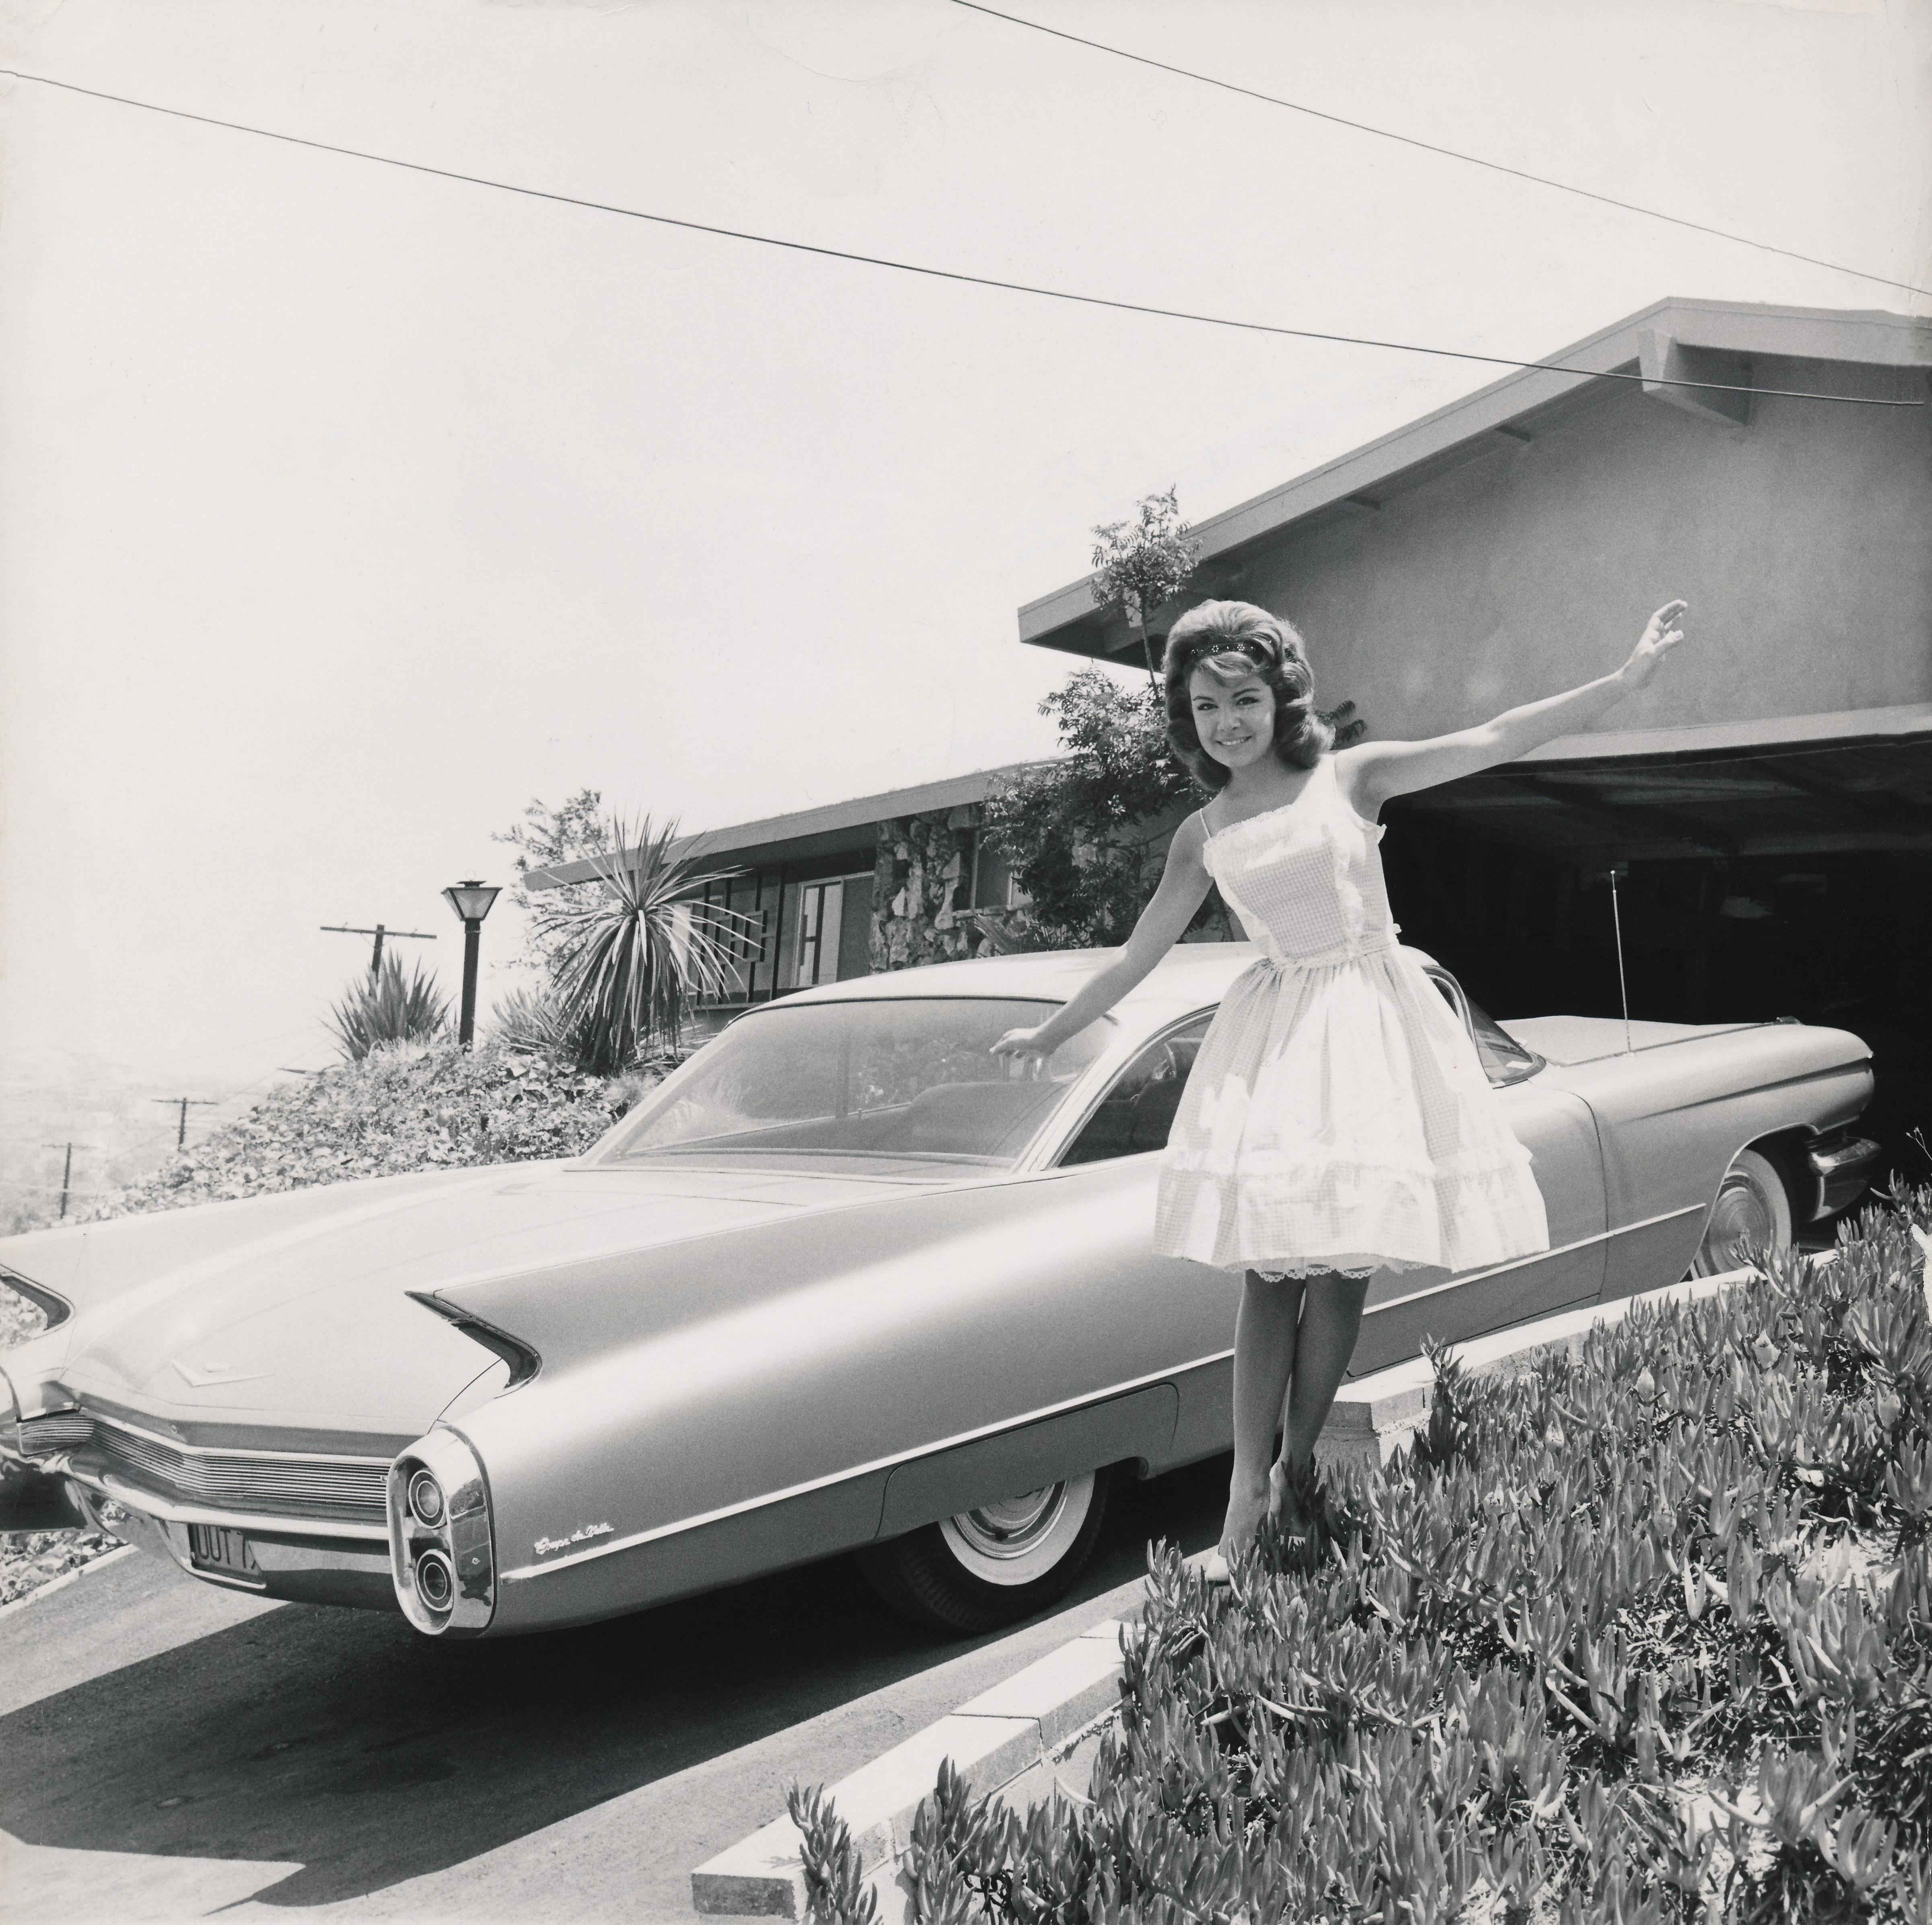 Unknown Portrait Photograph - Anette Funicello Waving with Classic Cadillac Fine Art Print